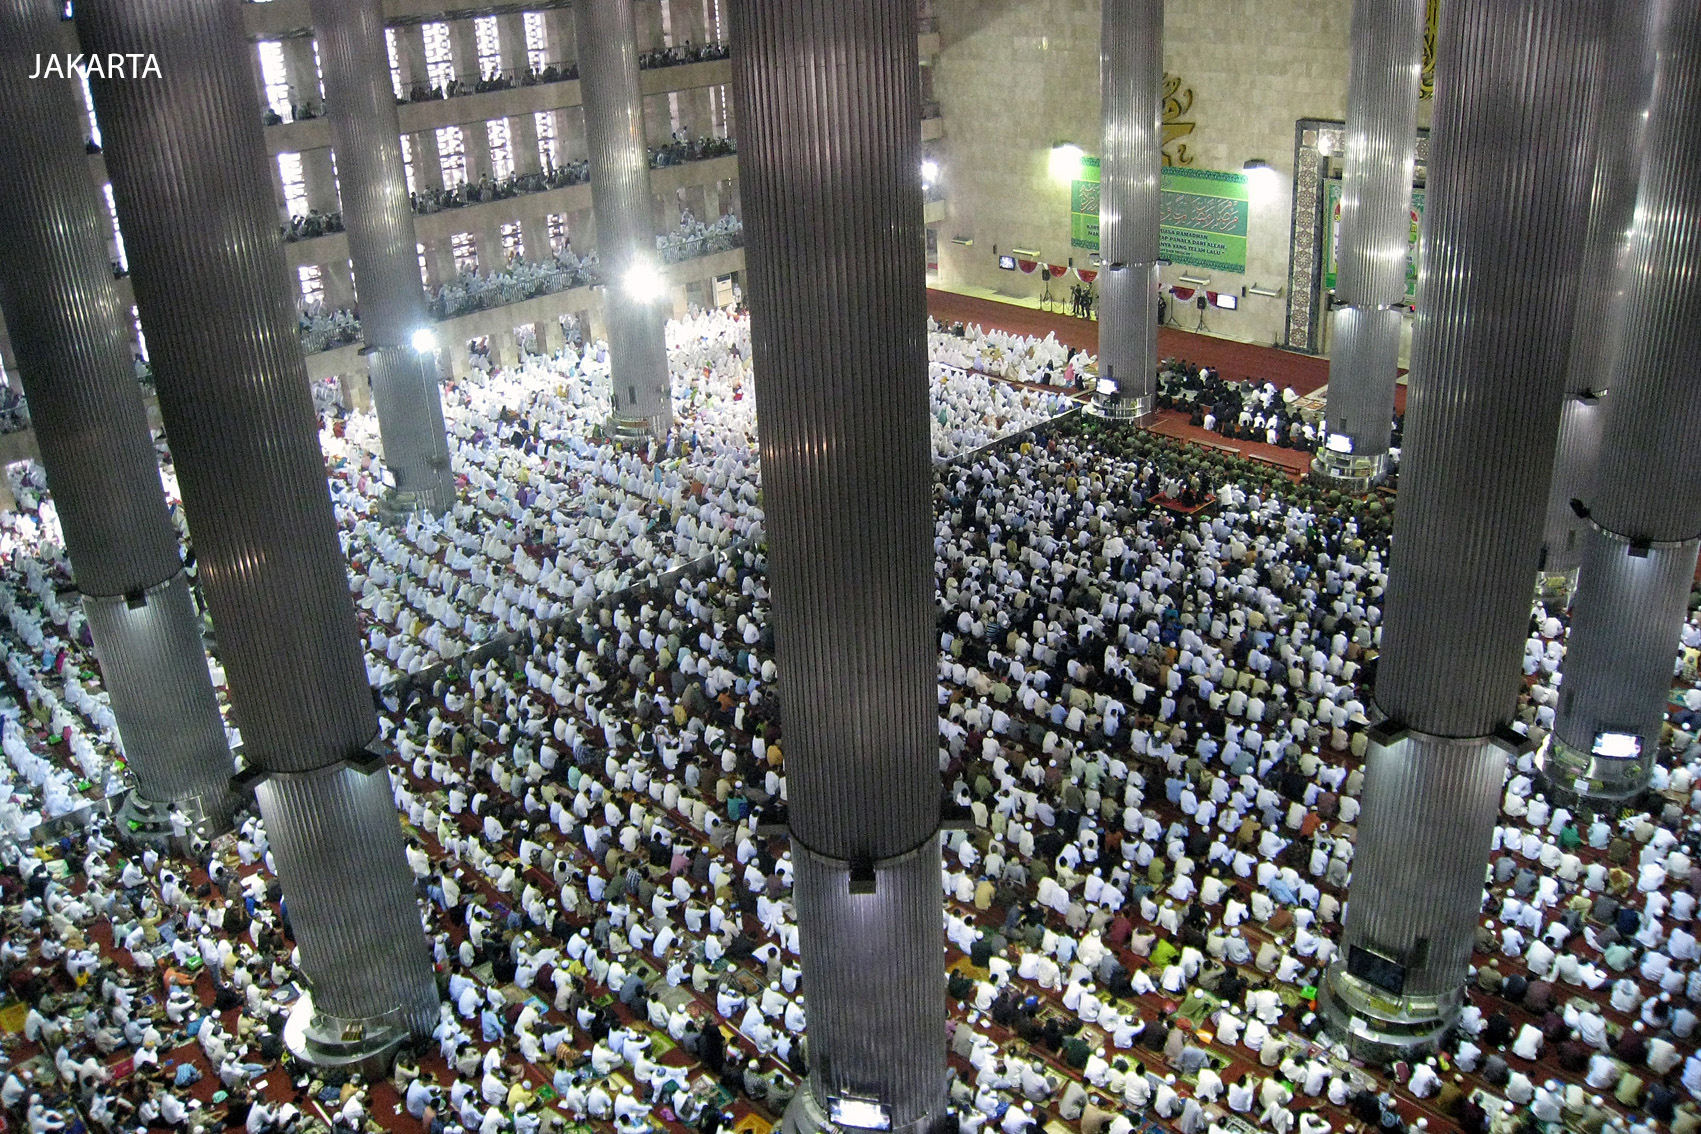 Thousands of the Indonesian muslims congregrated during Eid ul Fitr mass prayer in Istiqlal Mosque, the largest mosque in Southeast Asia, located in Central Jakarta, Indonesia.